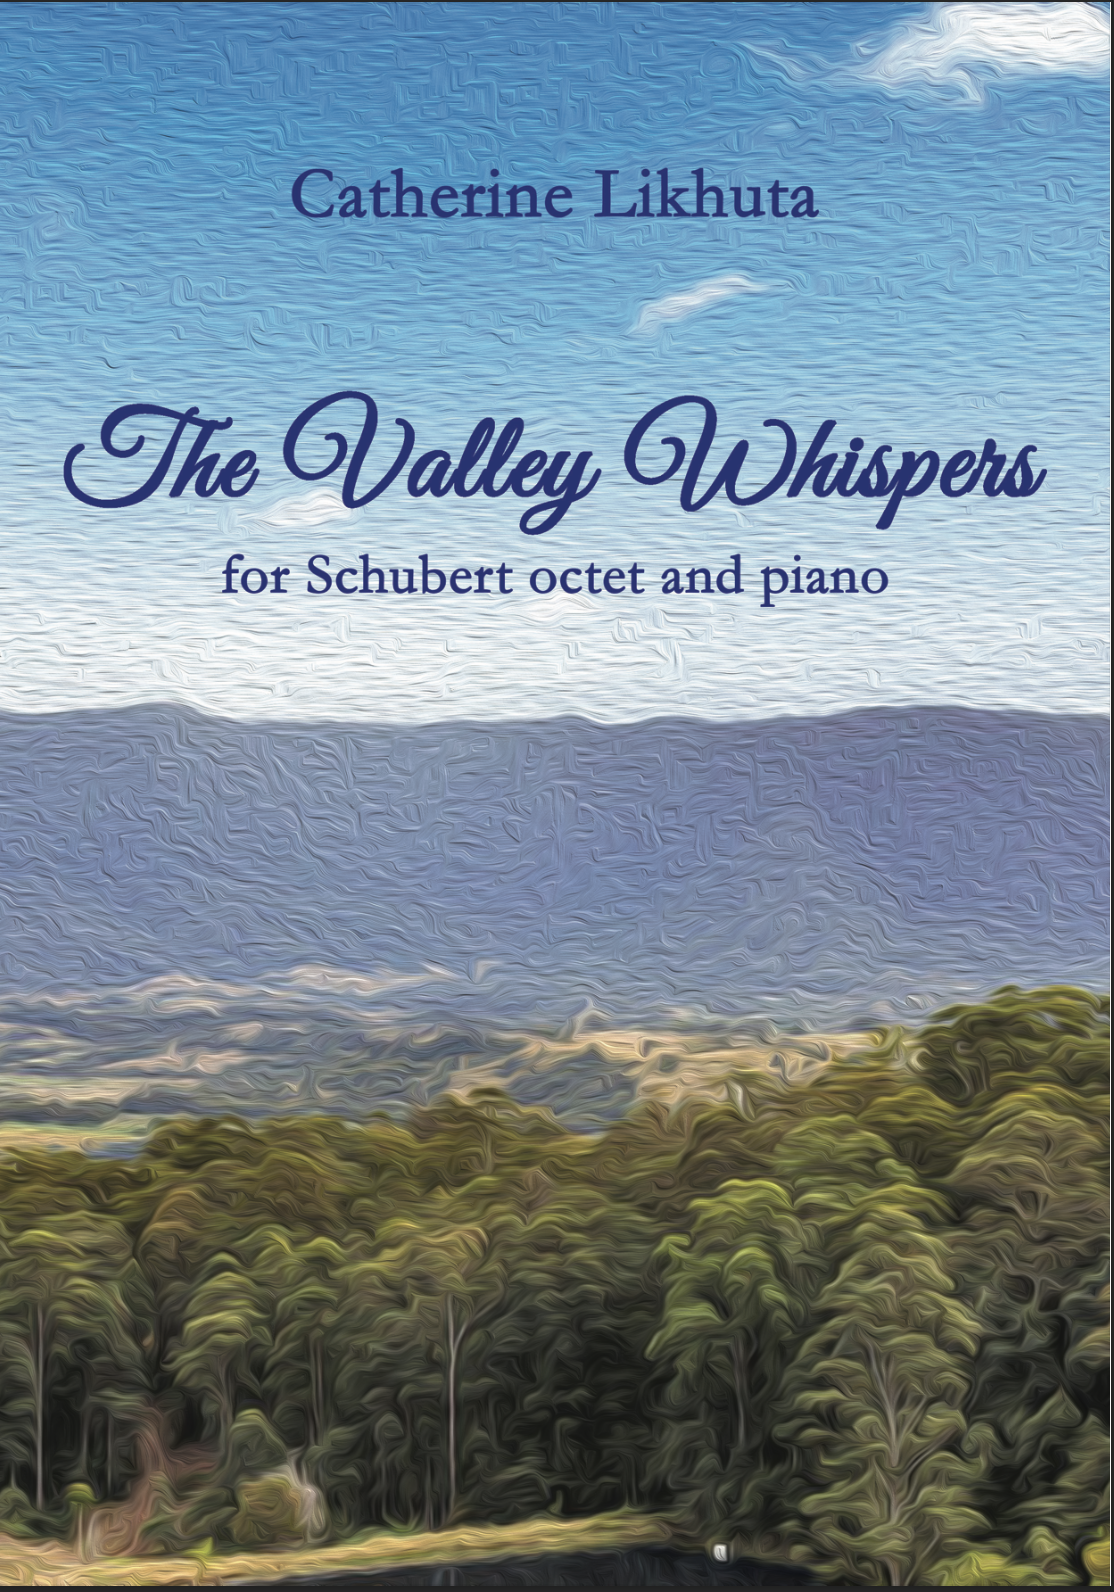 The Valley Whispers by Catherine Likhuta